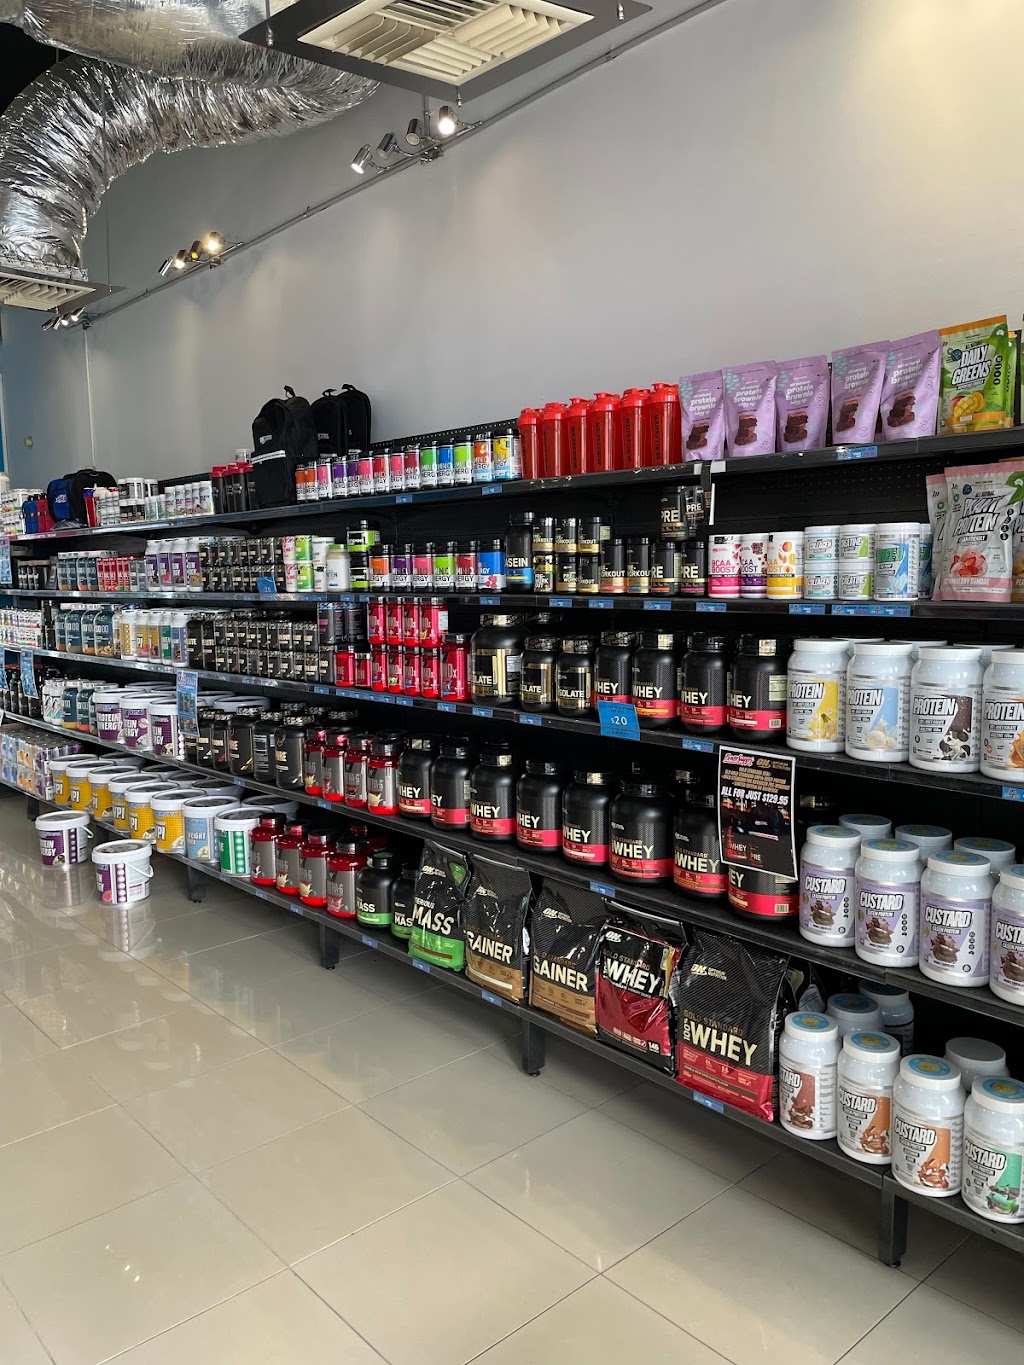 Power Supps Coorparoo - Supplements Brisbane | store | Shop 1/429 Old Cleveland Rd, Coorparoo QLD 4151, Australia | 0733983369 OR +61 7 3398 3369